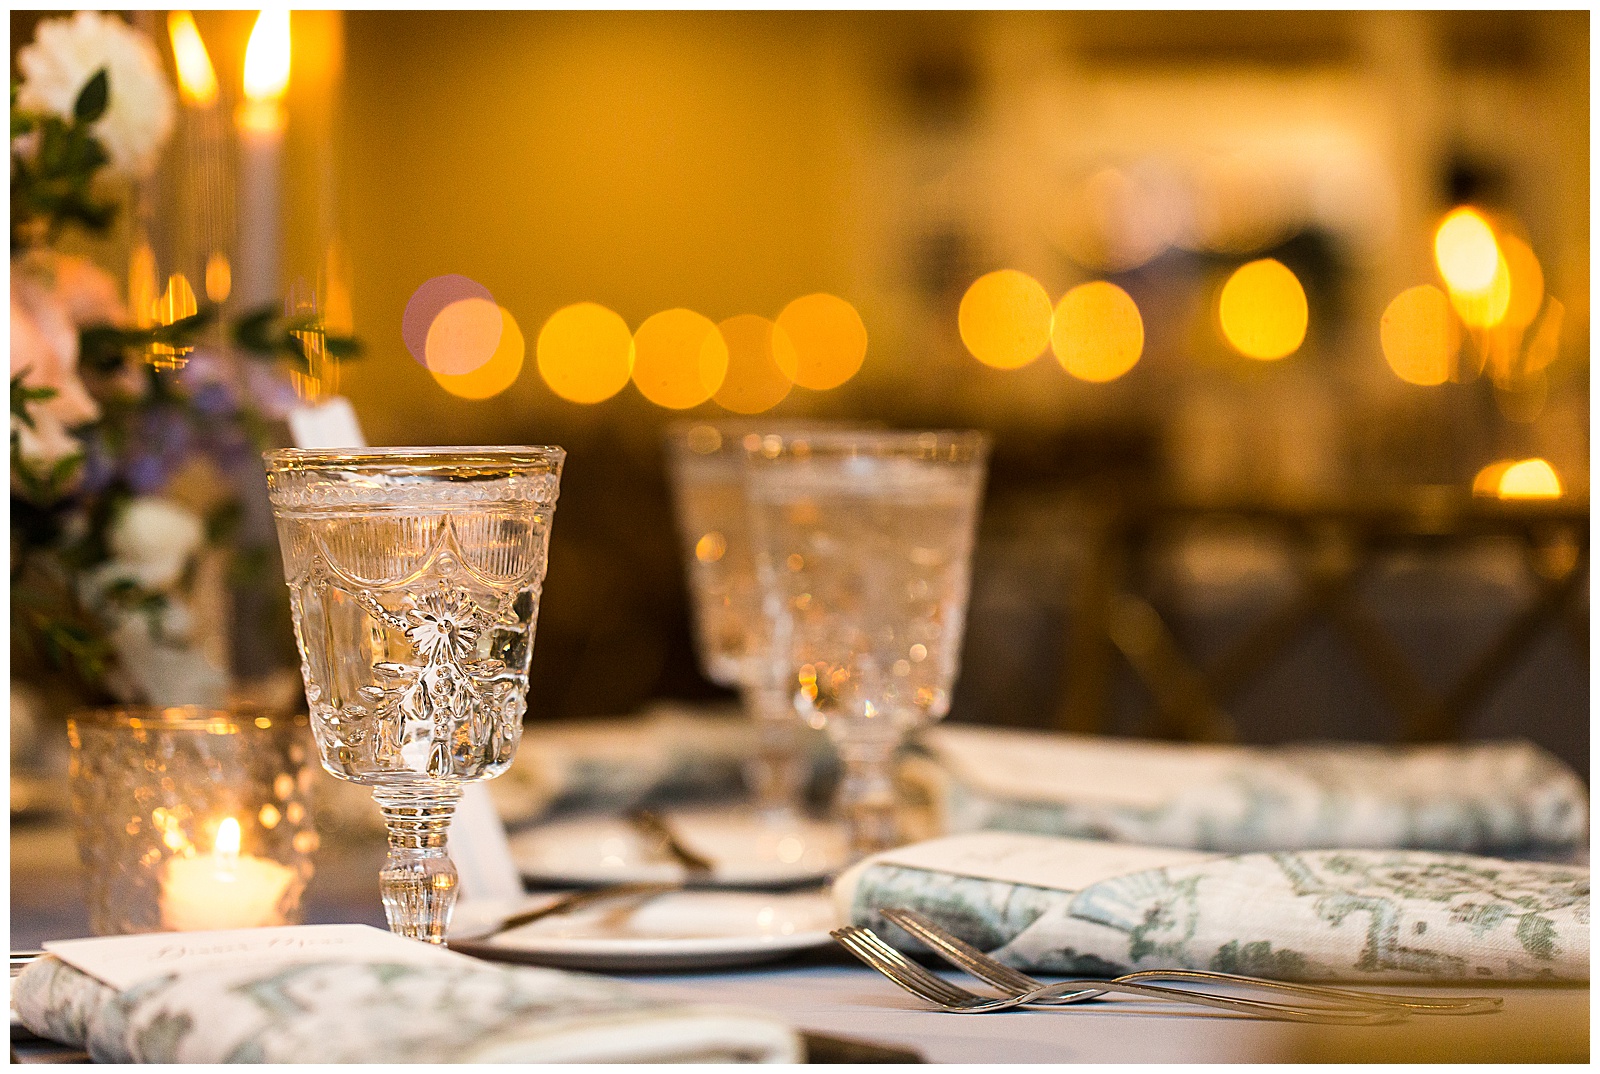 Twinkle lights and delicate glassware at wedding reception